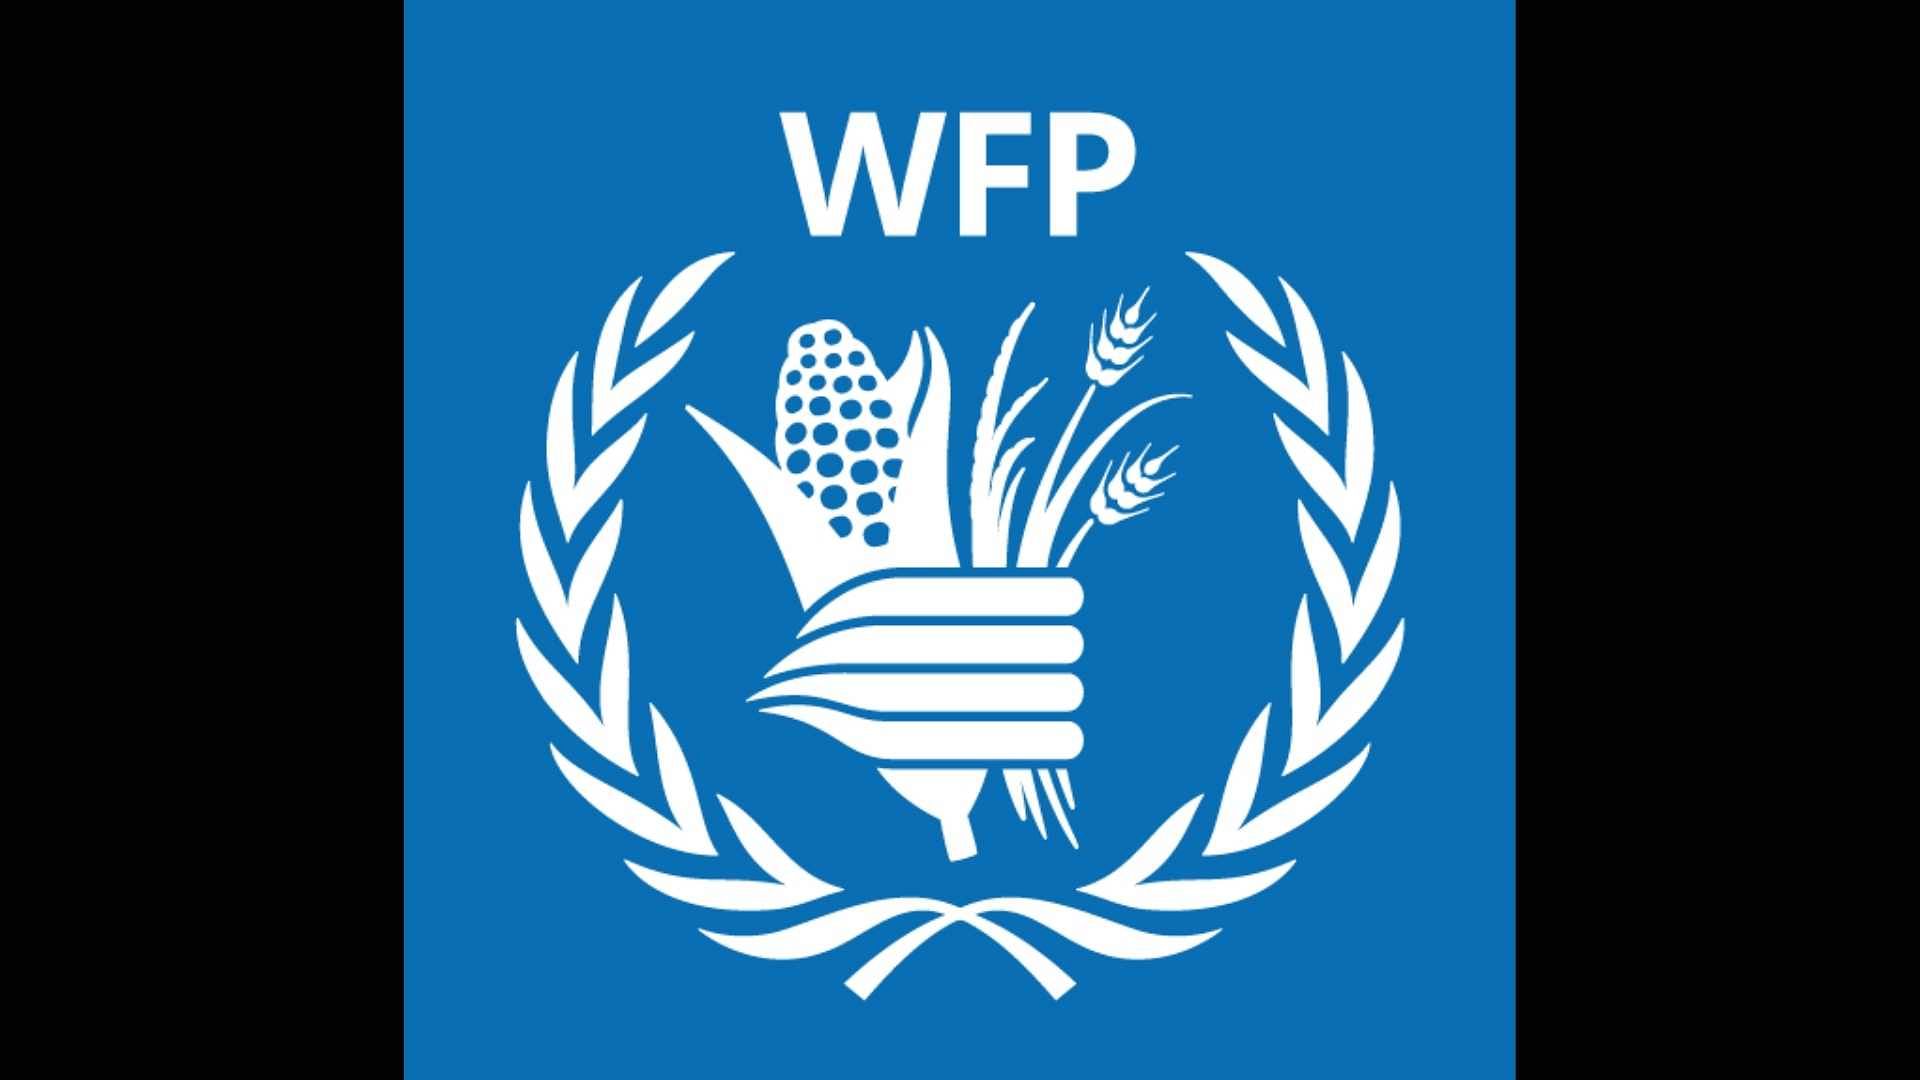 The WFP has been awarded “for its efforts to combat hunger, for its contribution to bettering conditions for peace.”